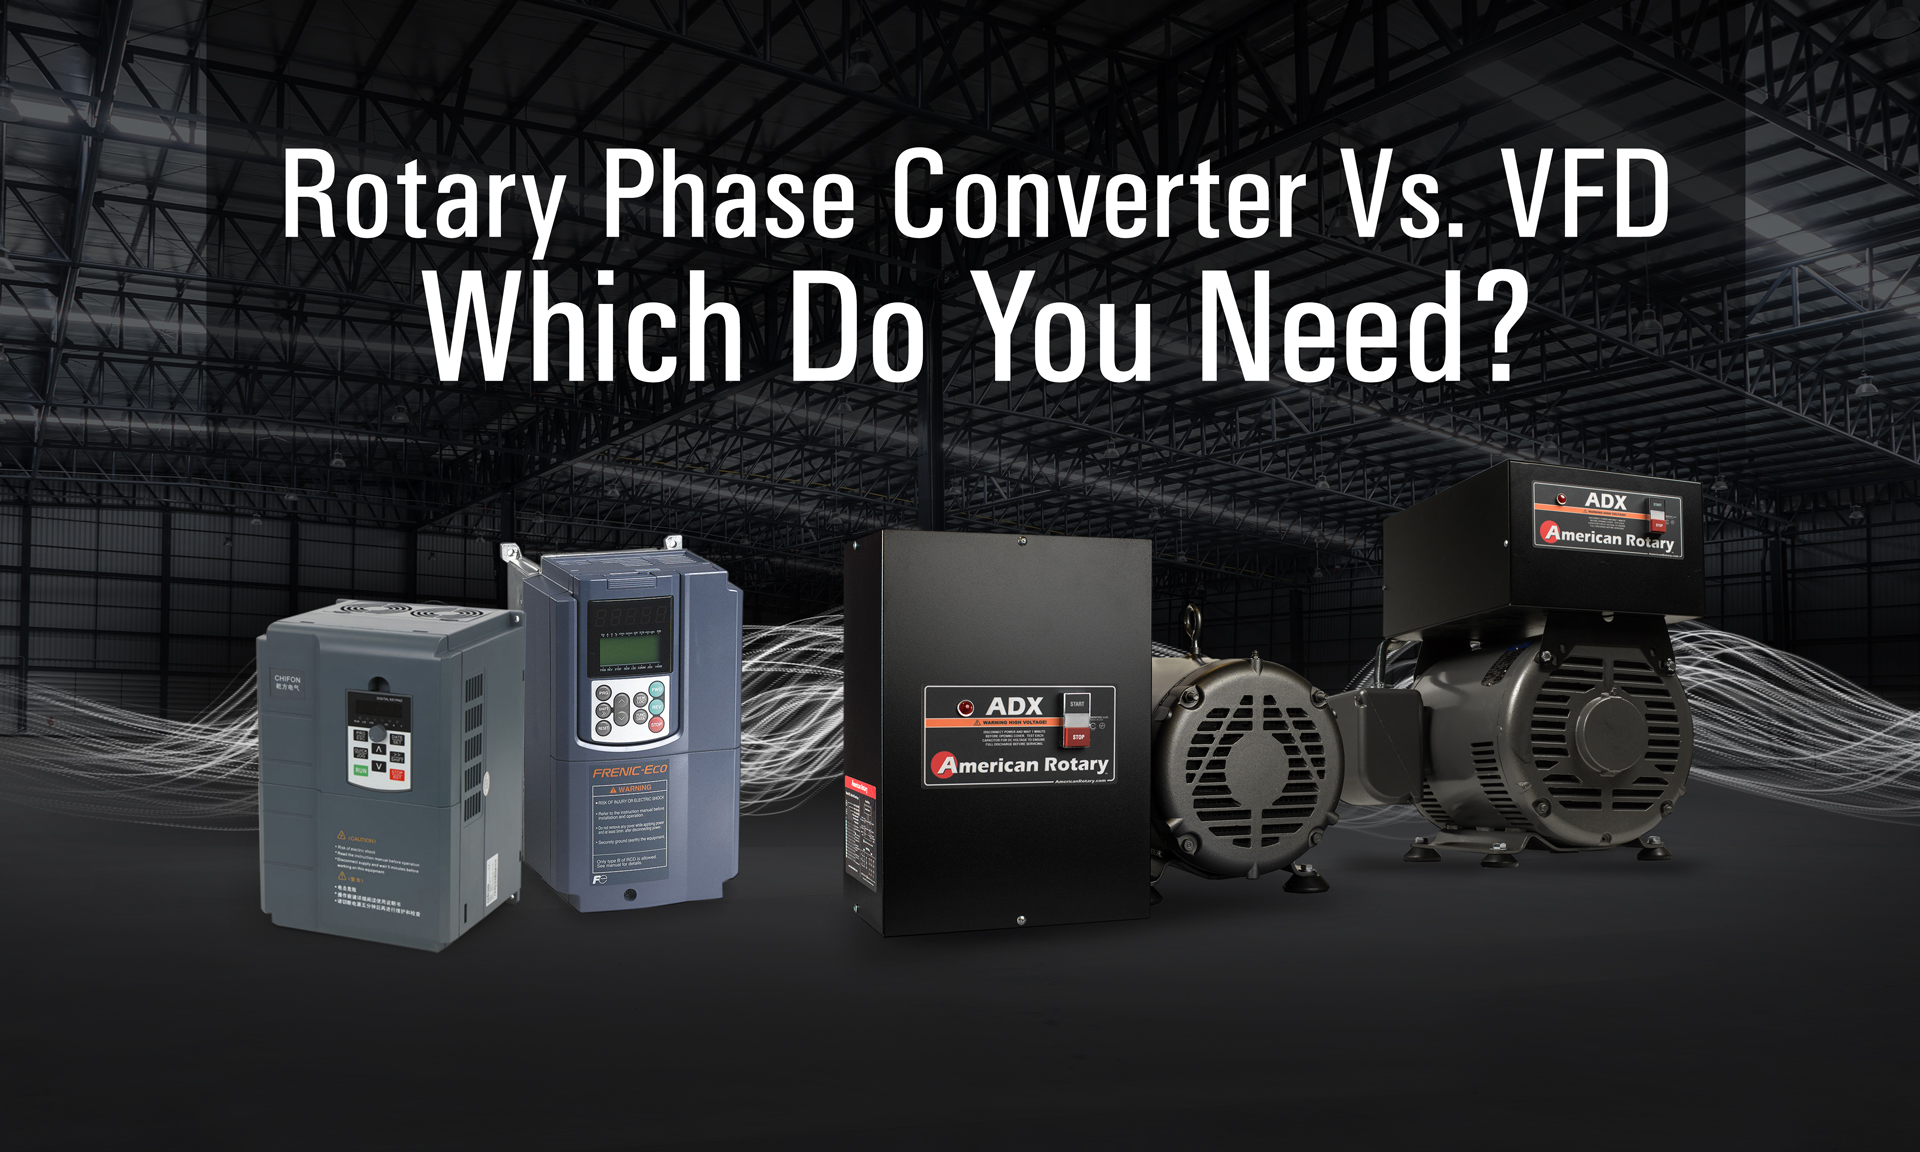 Rotary Phase Converter Vs. VFD: Which Do You Need? - American Rotary